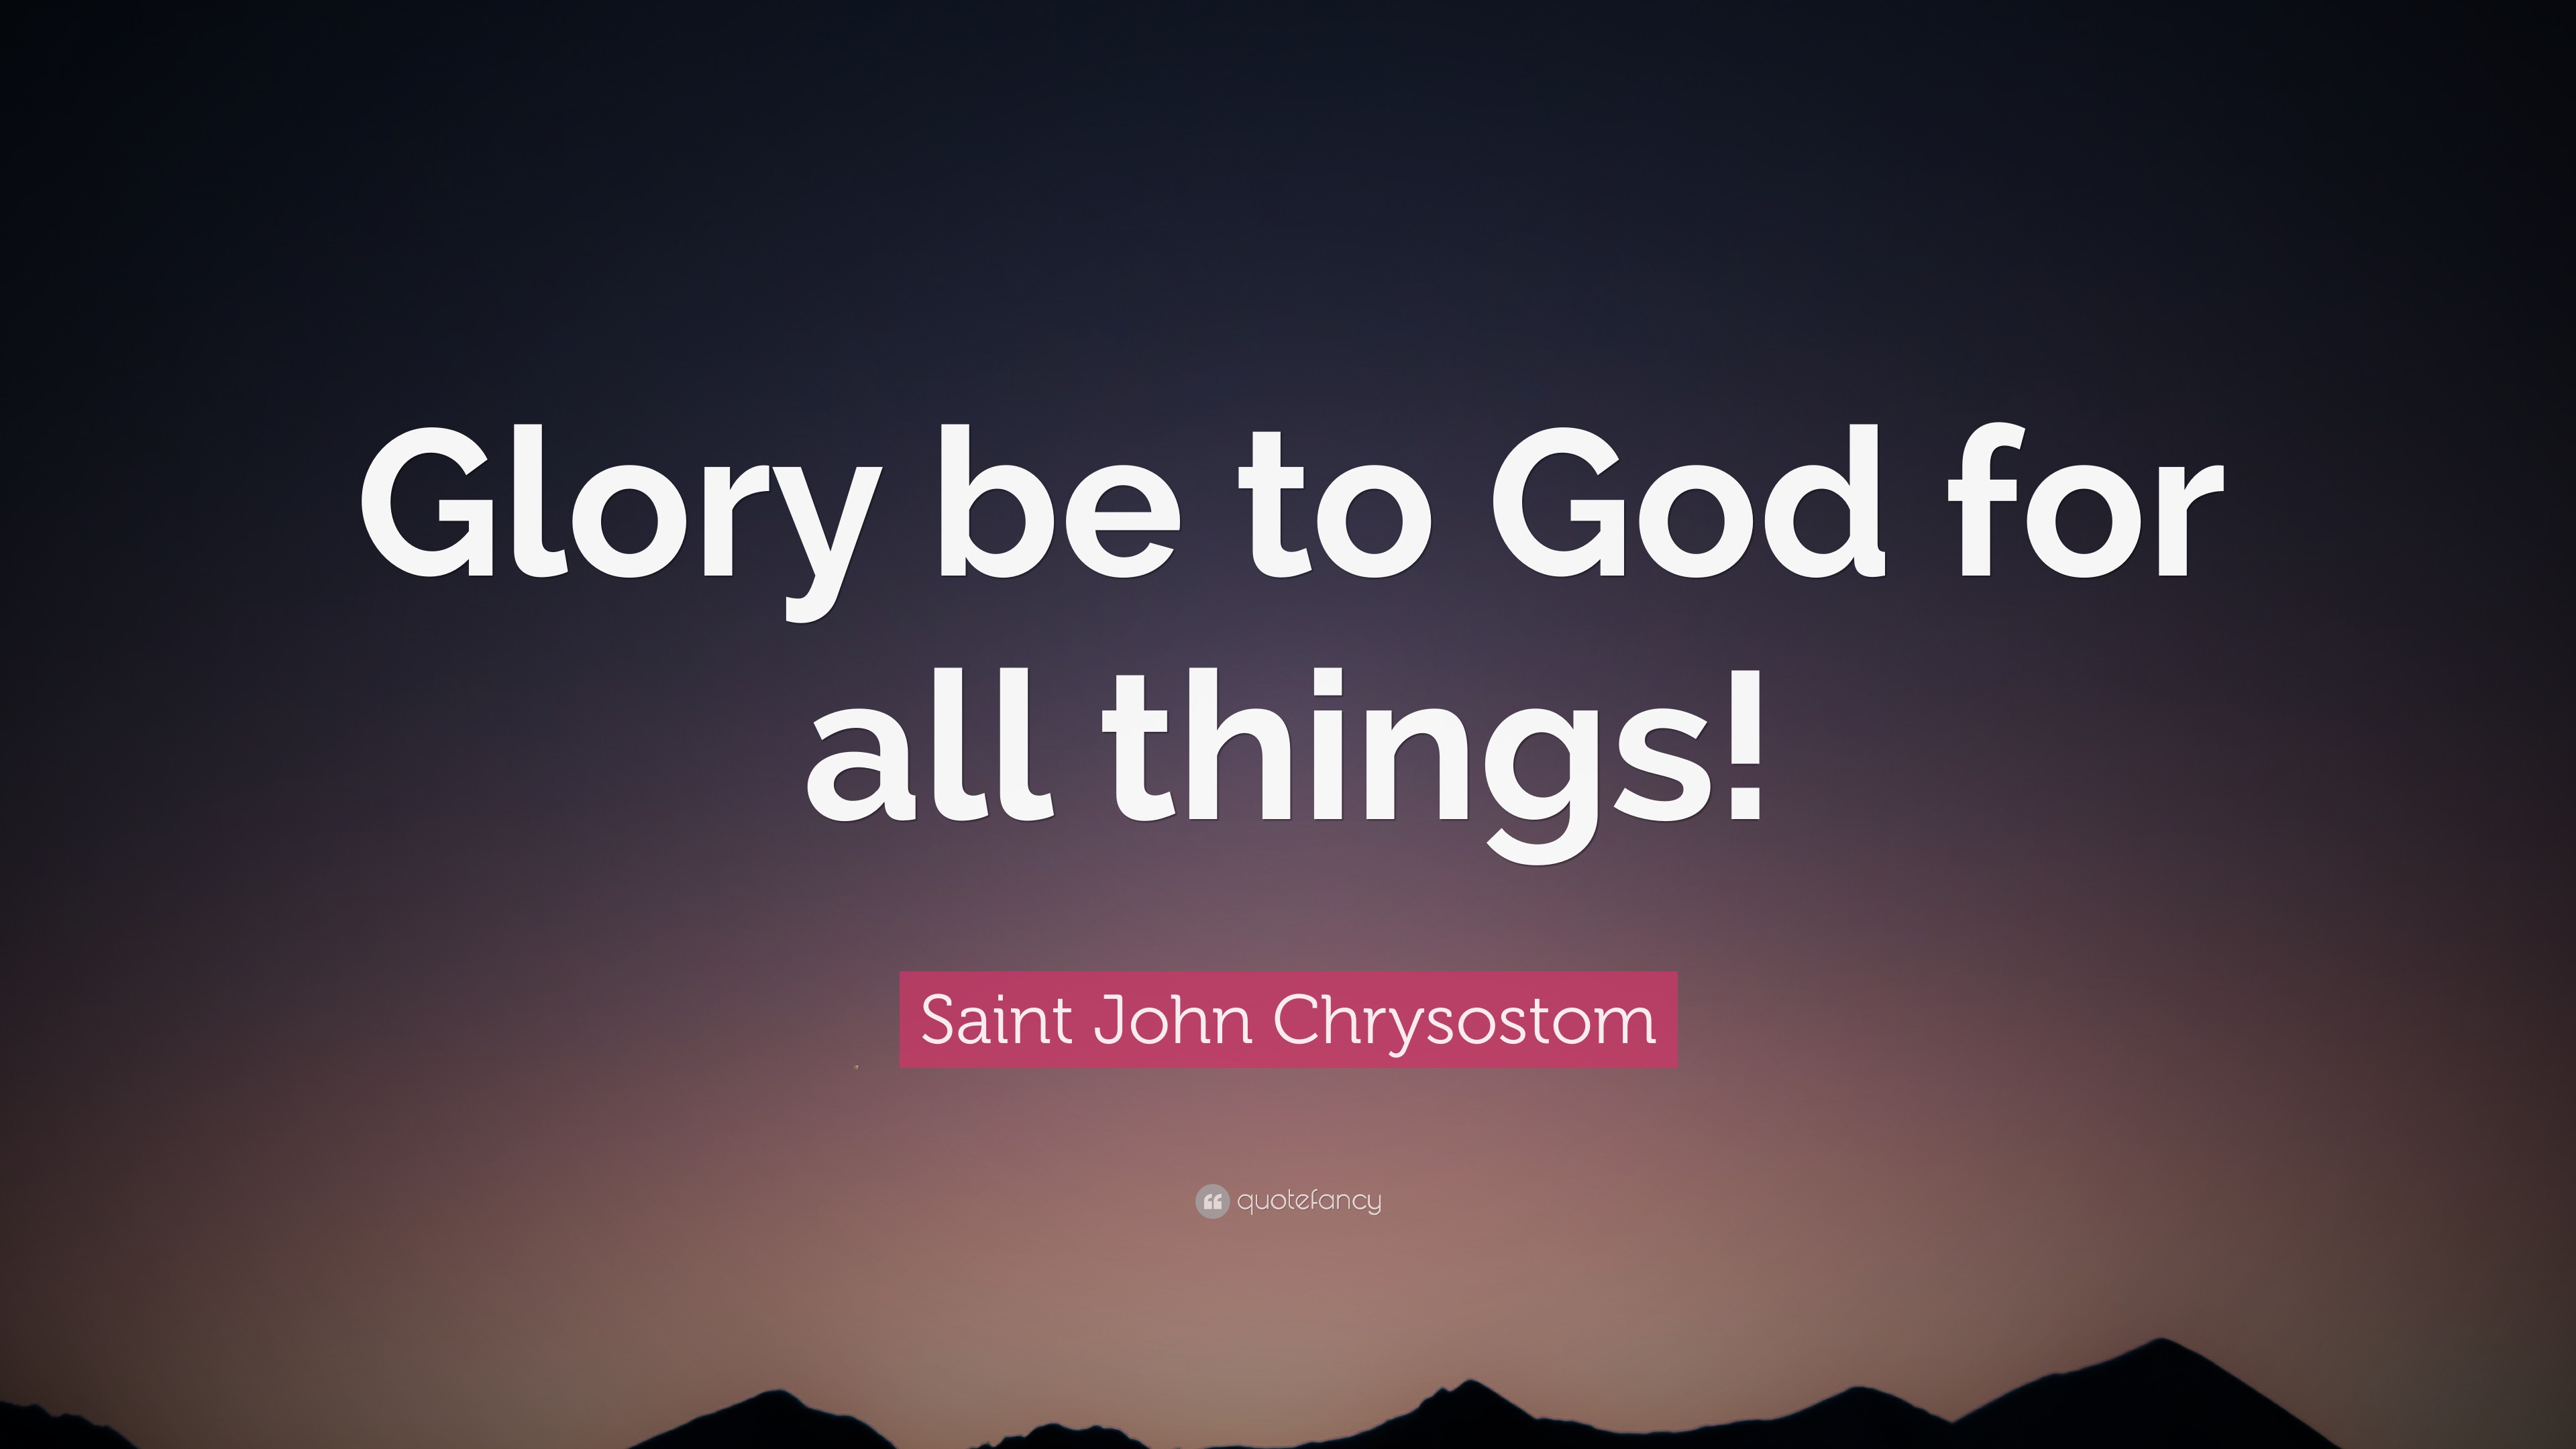 Saint John Chrysostom Quote: “Glory be to God for all things!”